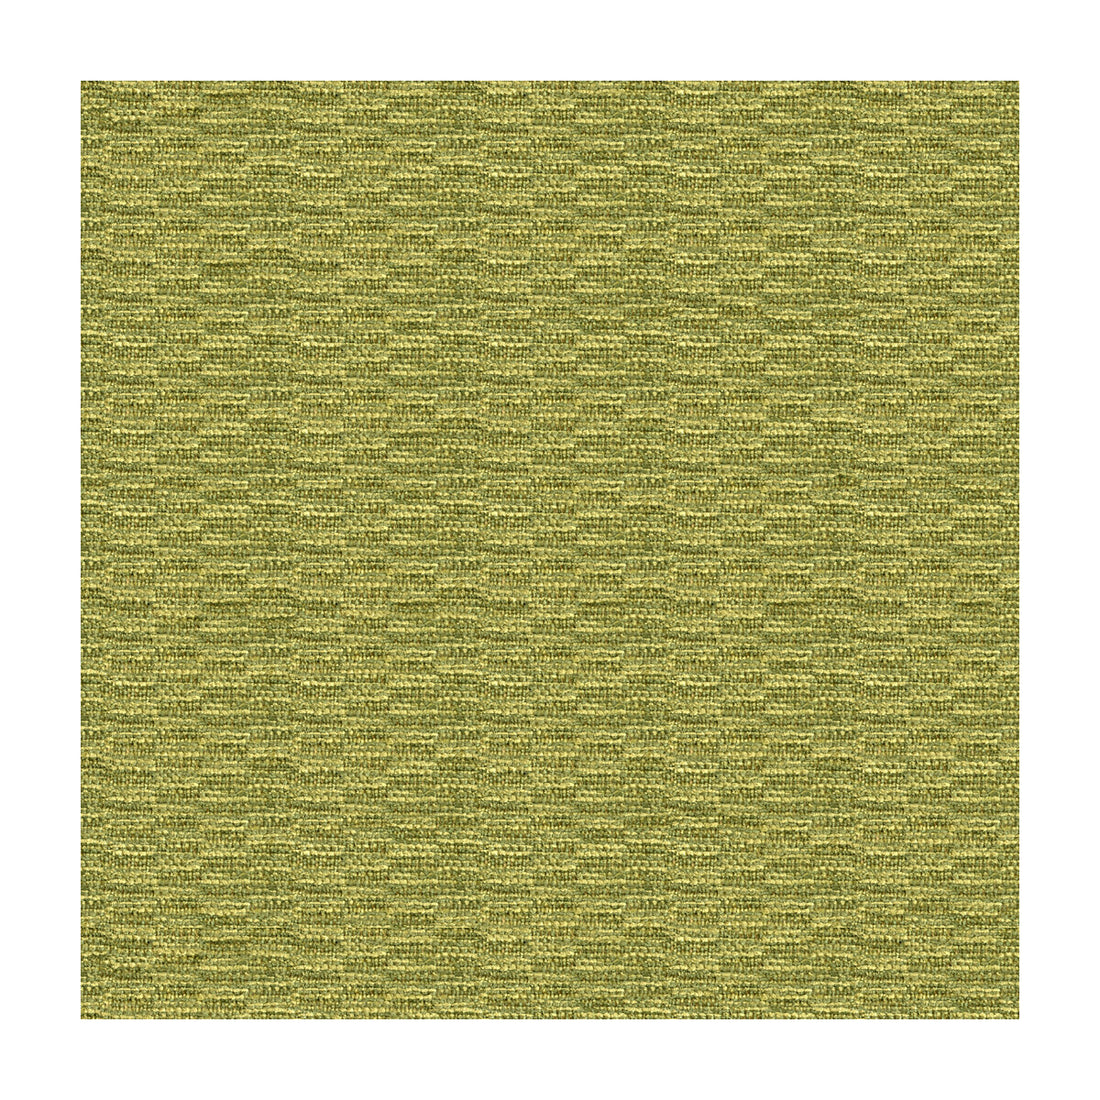 Barclay Texture fabric in avocado color - pattern BR-800042.434.0 - by Brunschwig &amp; Fils